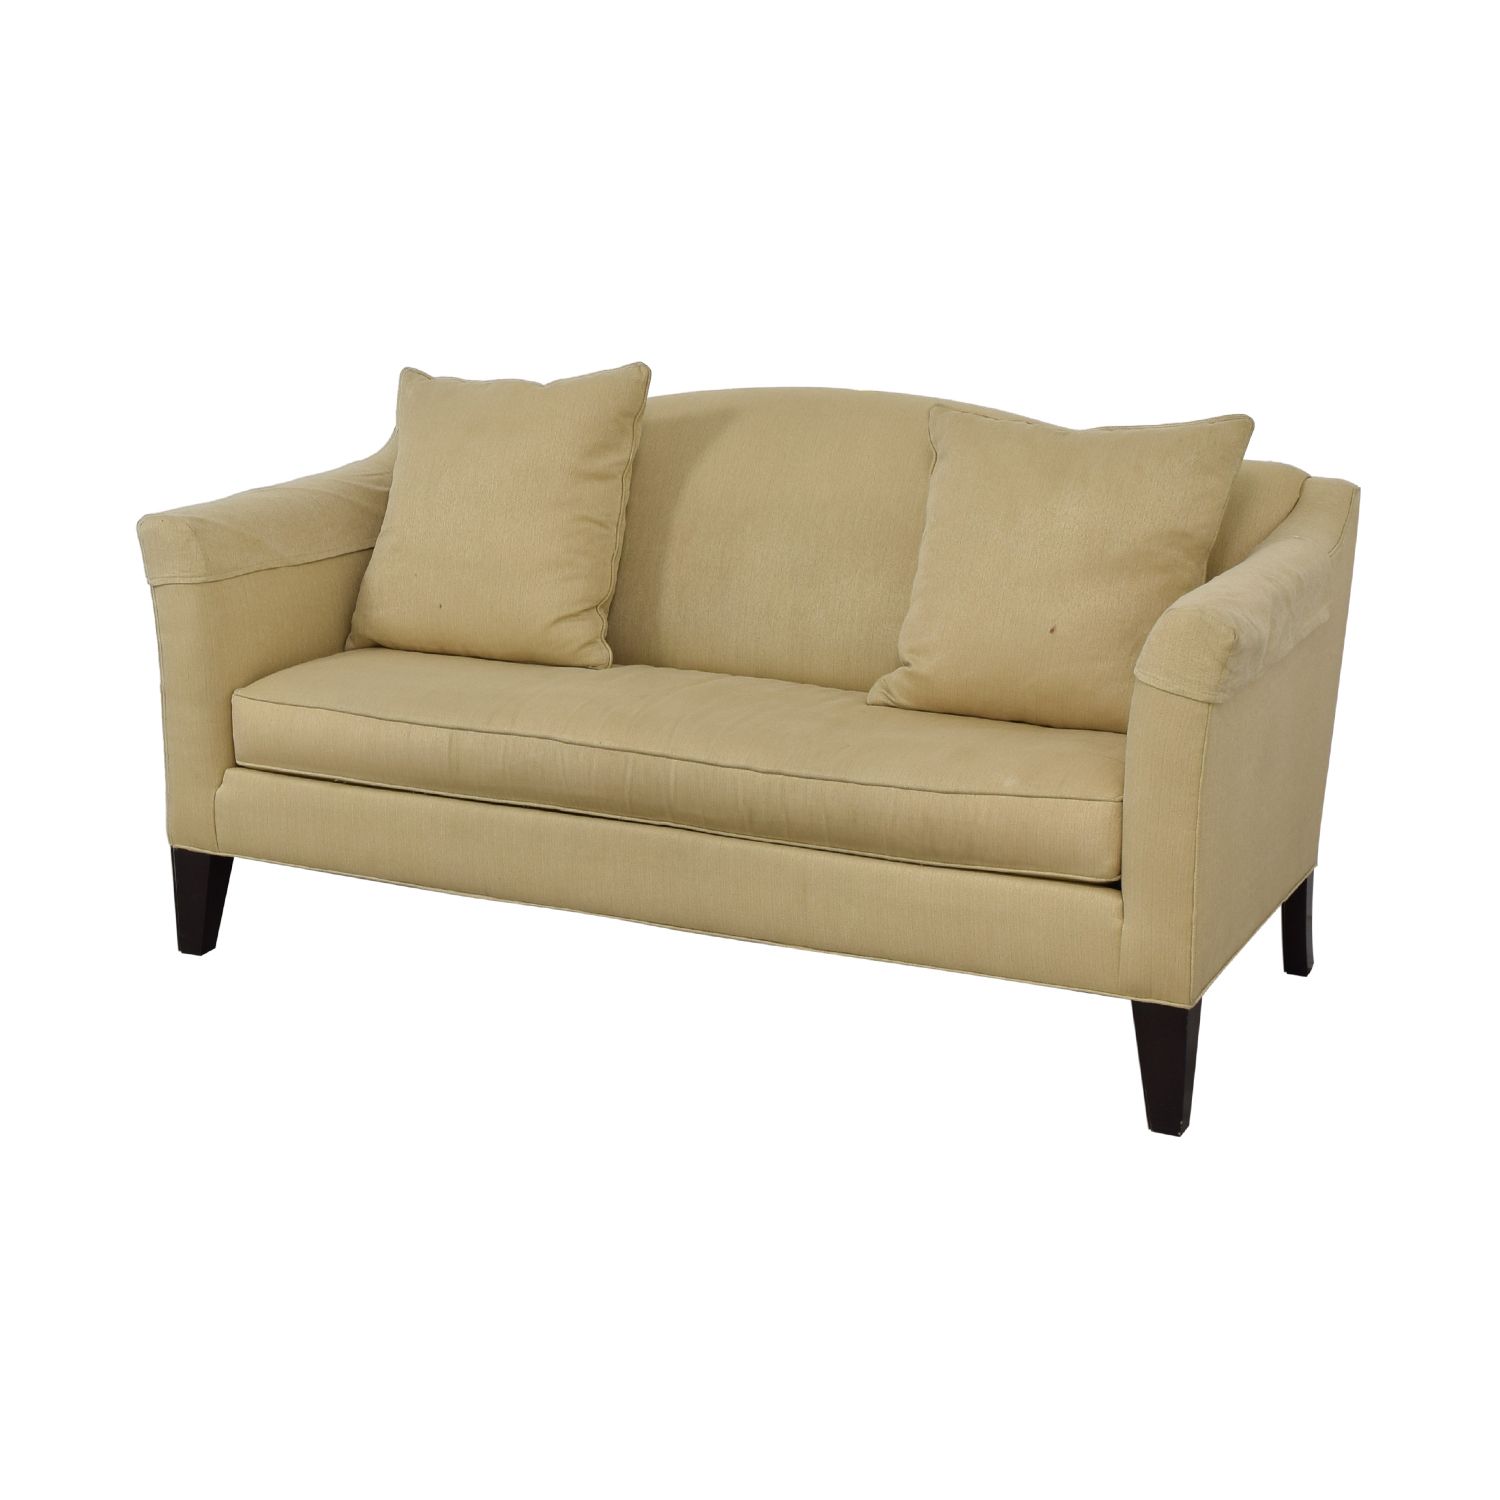 90% Off – Ethan Allen Ethan Allen Hartwell Camel Single Within Ethan Allen Sofas And Chairs (View 7 of 15)